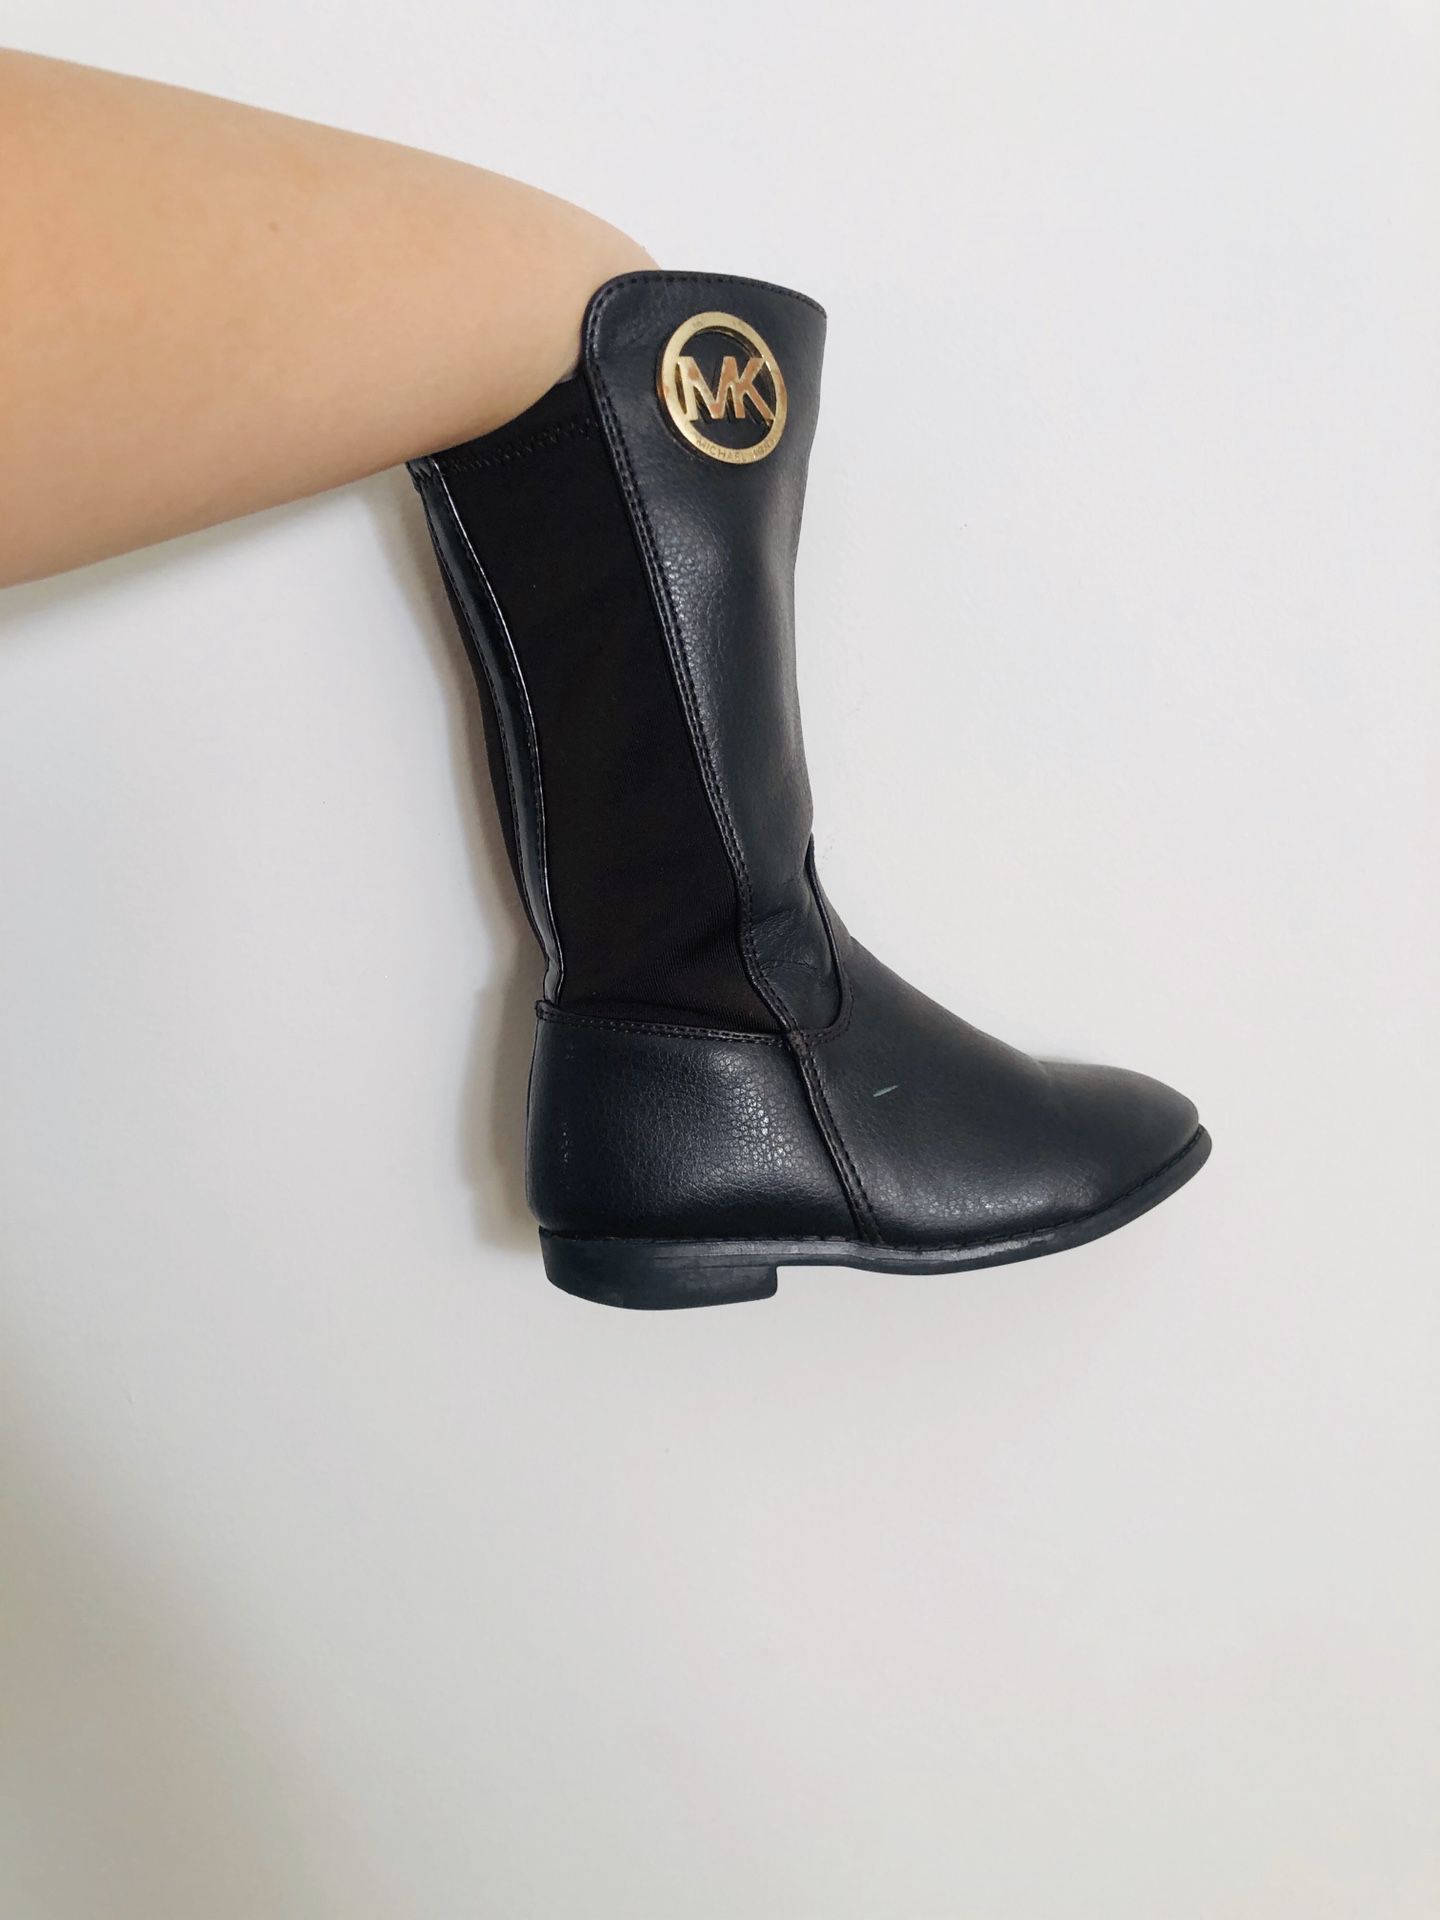 Boots for toddler girl Michael Kors, size 7